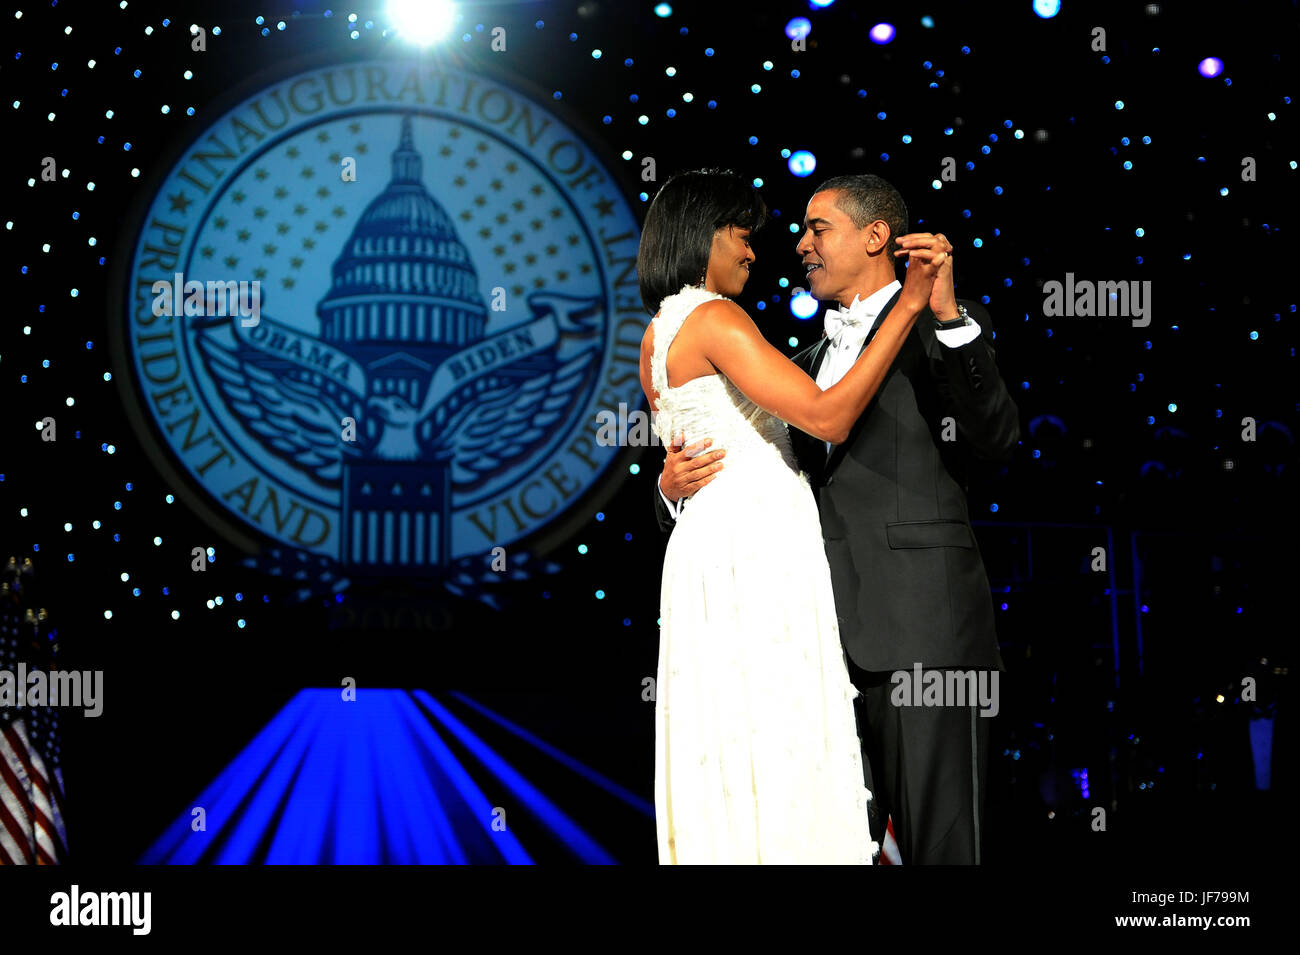 President Barack Obama and first lady Michelle Obama dance at the Neighborhood Ball in downtown Washington, D.C., Jan. 20, 2009. DoD photo by Tech. Sgt. Suzanne Day, U.S. Air Force Stock Photo